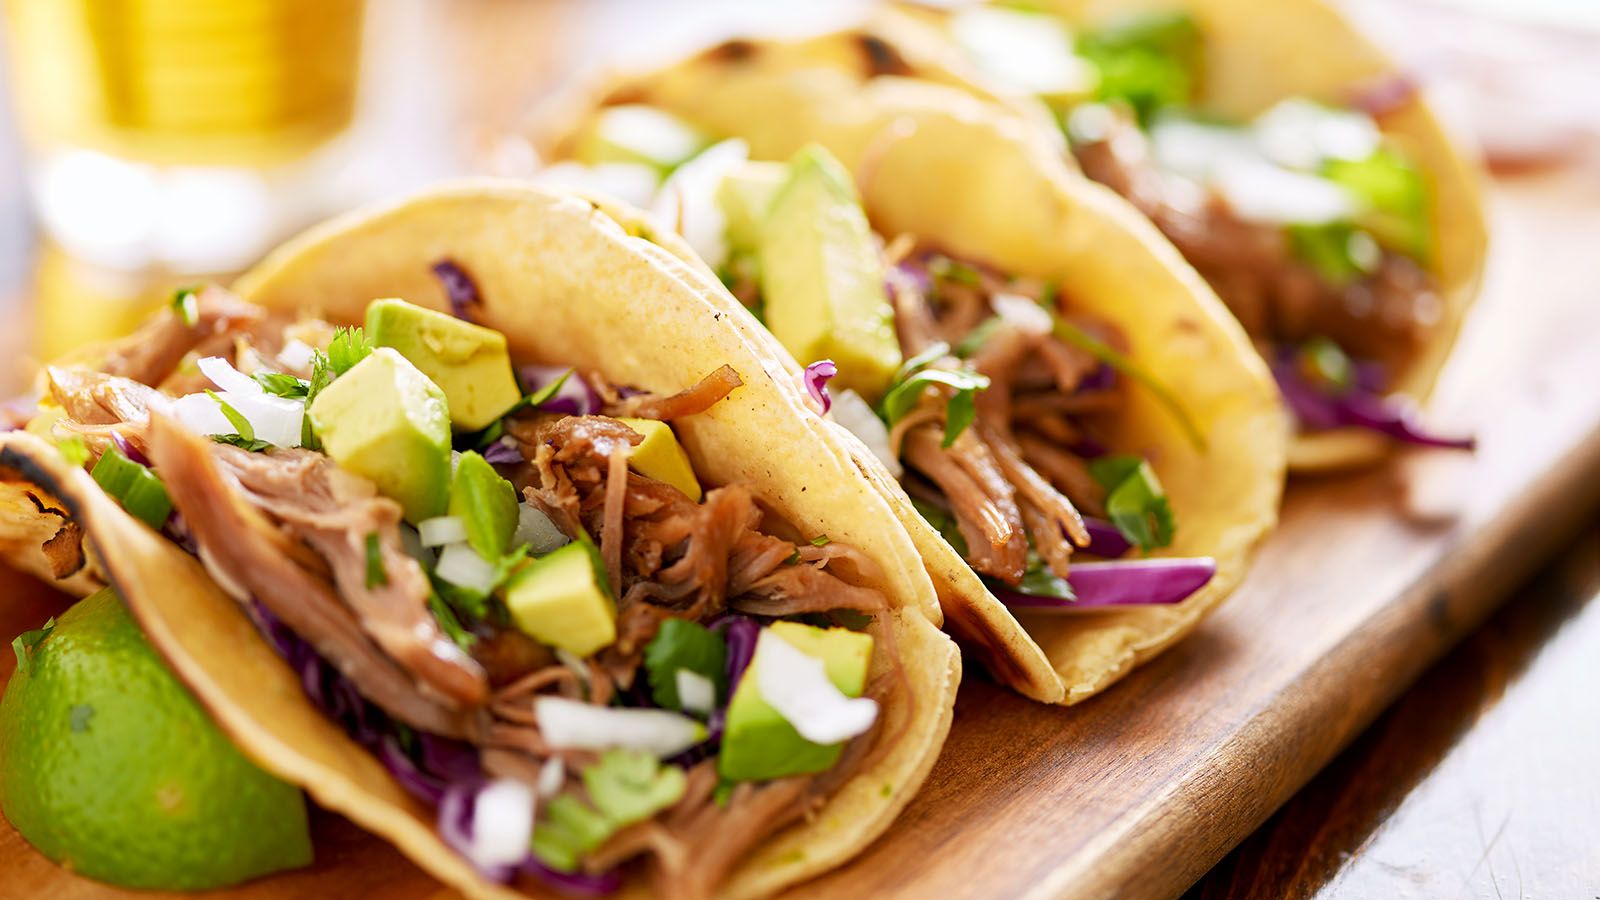 The Tacos Tequila & Margaritas Festival returns to Headwaters Park on May 13.